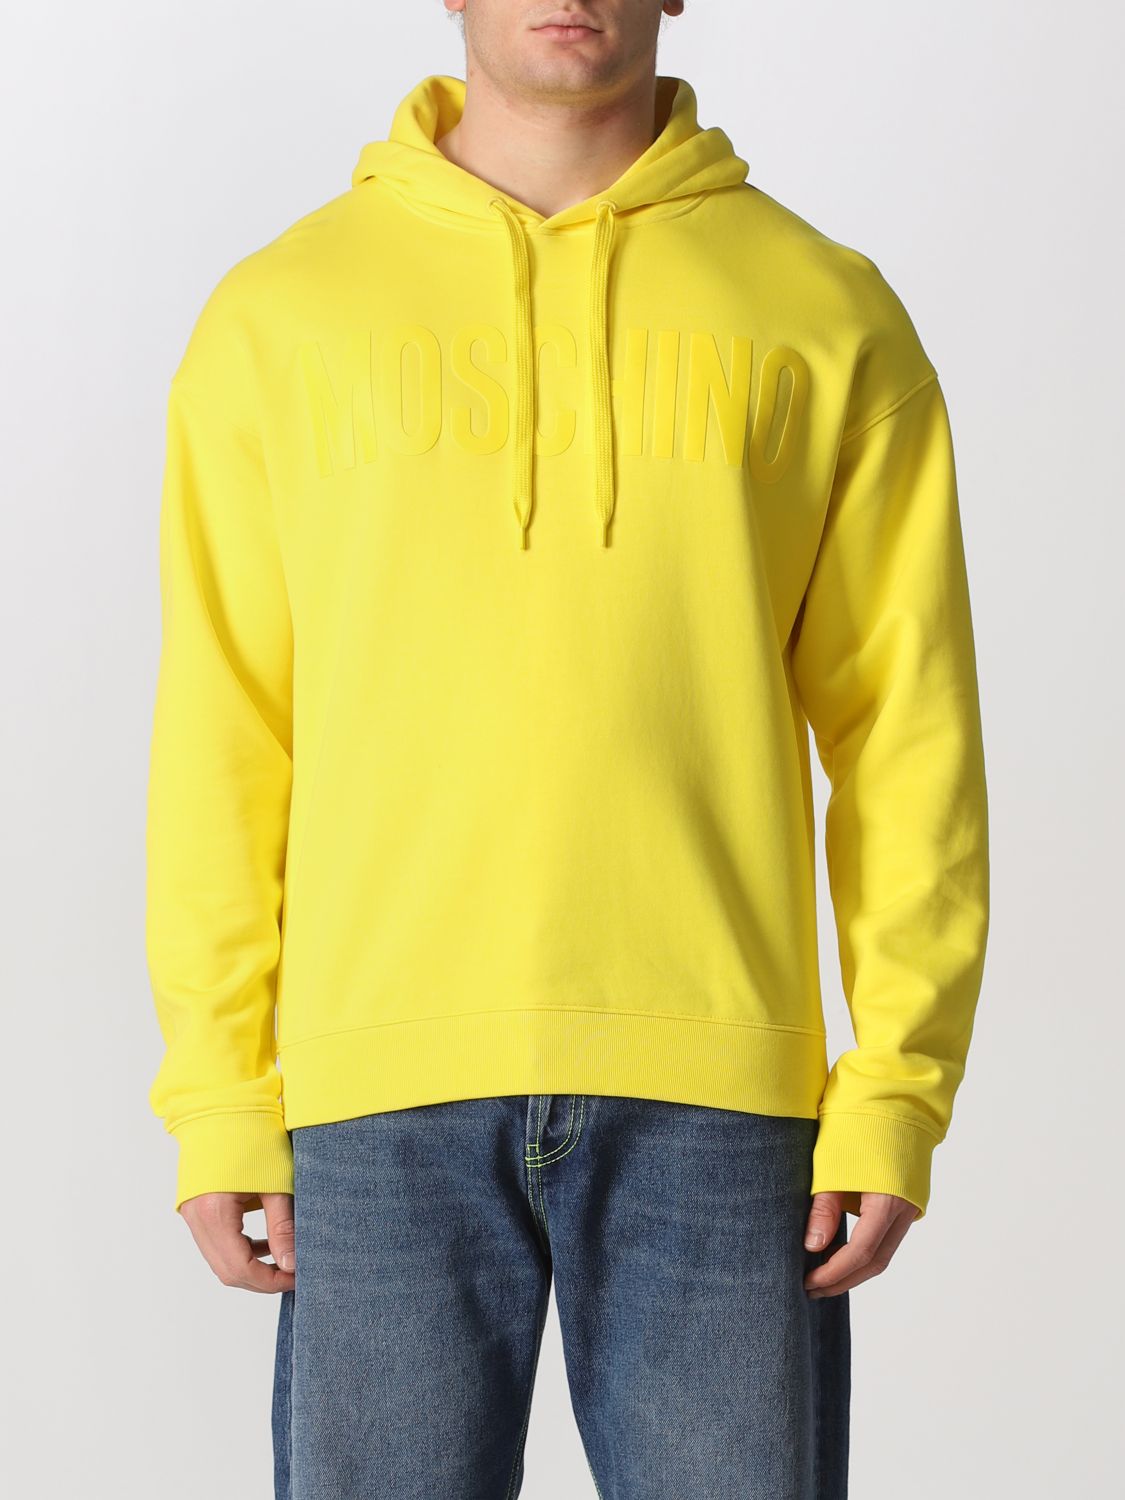 MOSCHINO COUTURE: cotton hoodie with logo - Yellow | Moschino Couture ...